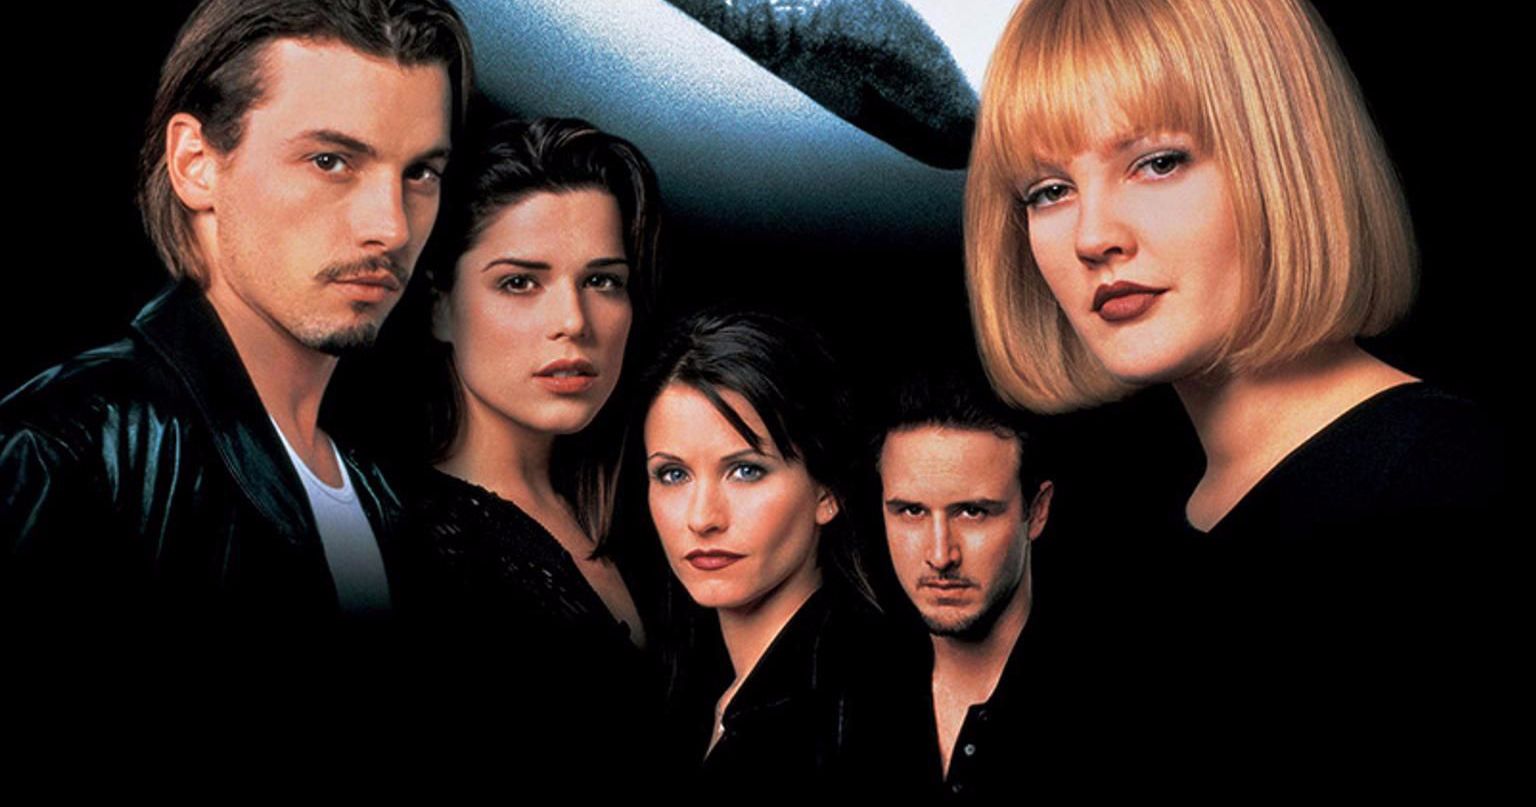 Scream Cast Reunion Is Happening This Saturday for Charity